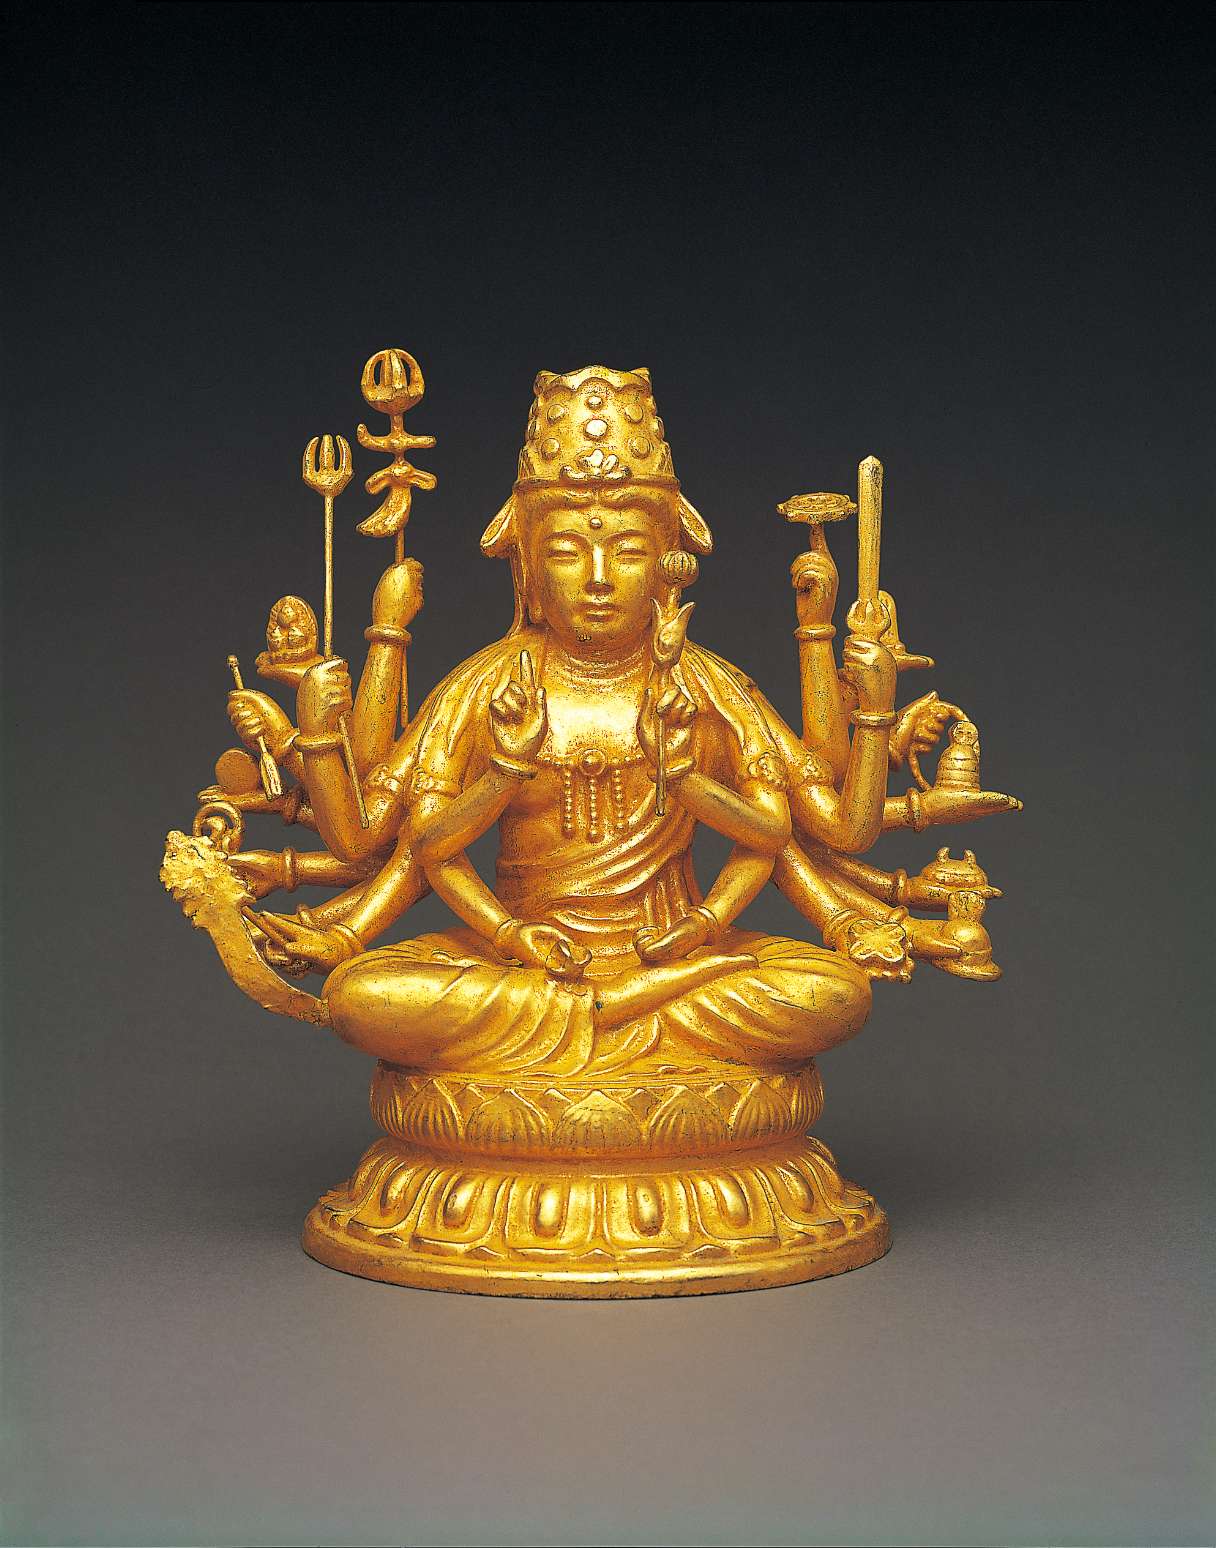 A golden hued statue of a Buddha in royal garb and jewelry, wearing a high crown, with an array of twenty arms bearing symbolic implements, sitting cross-legged atop a stylized two-tiered lotus seat.